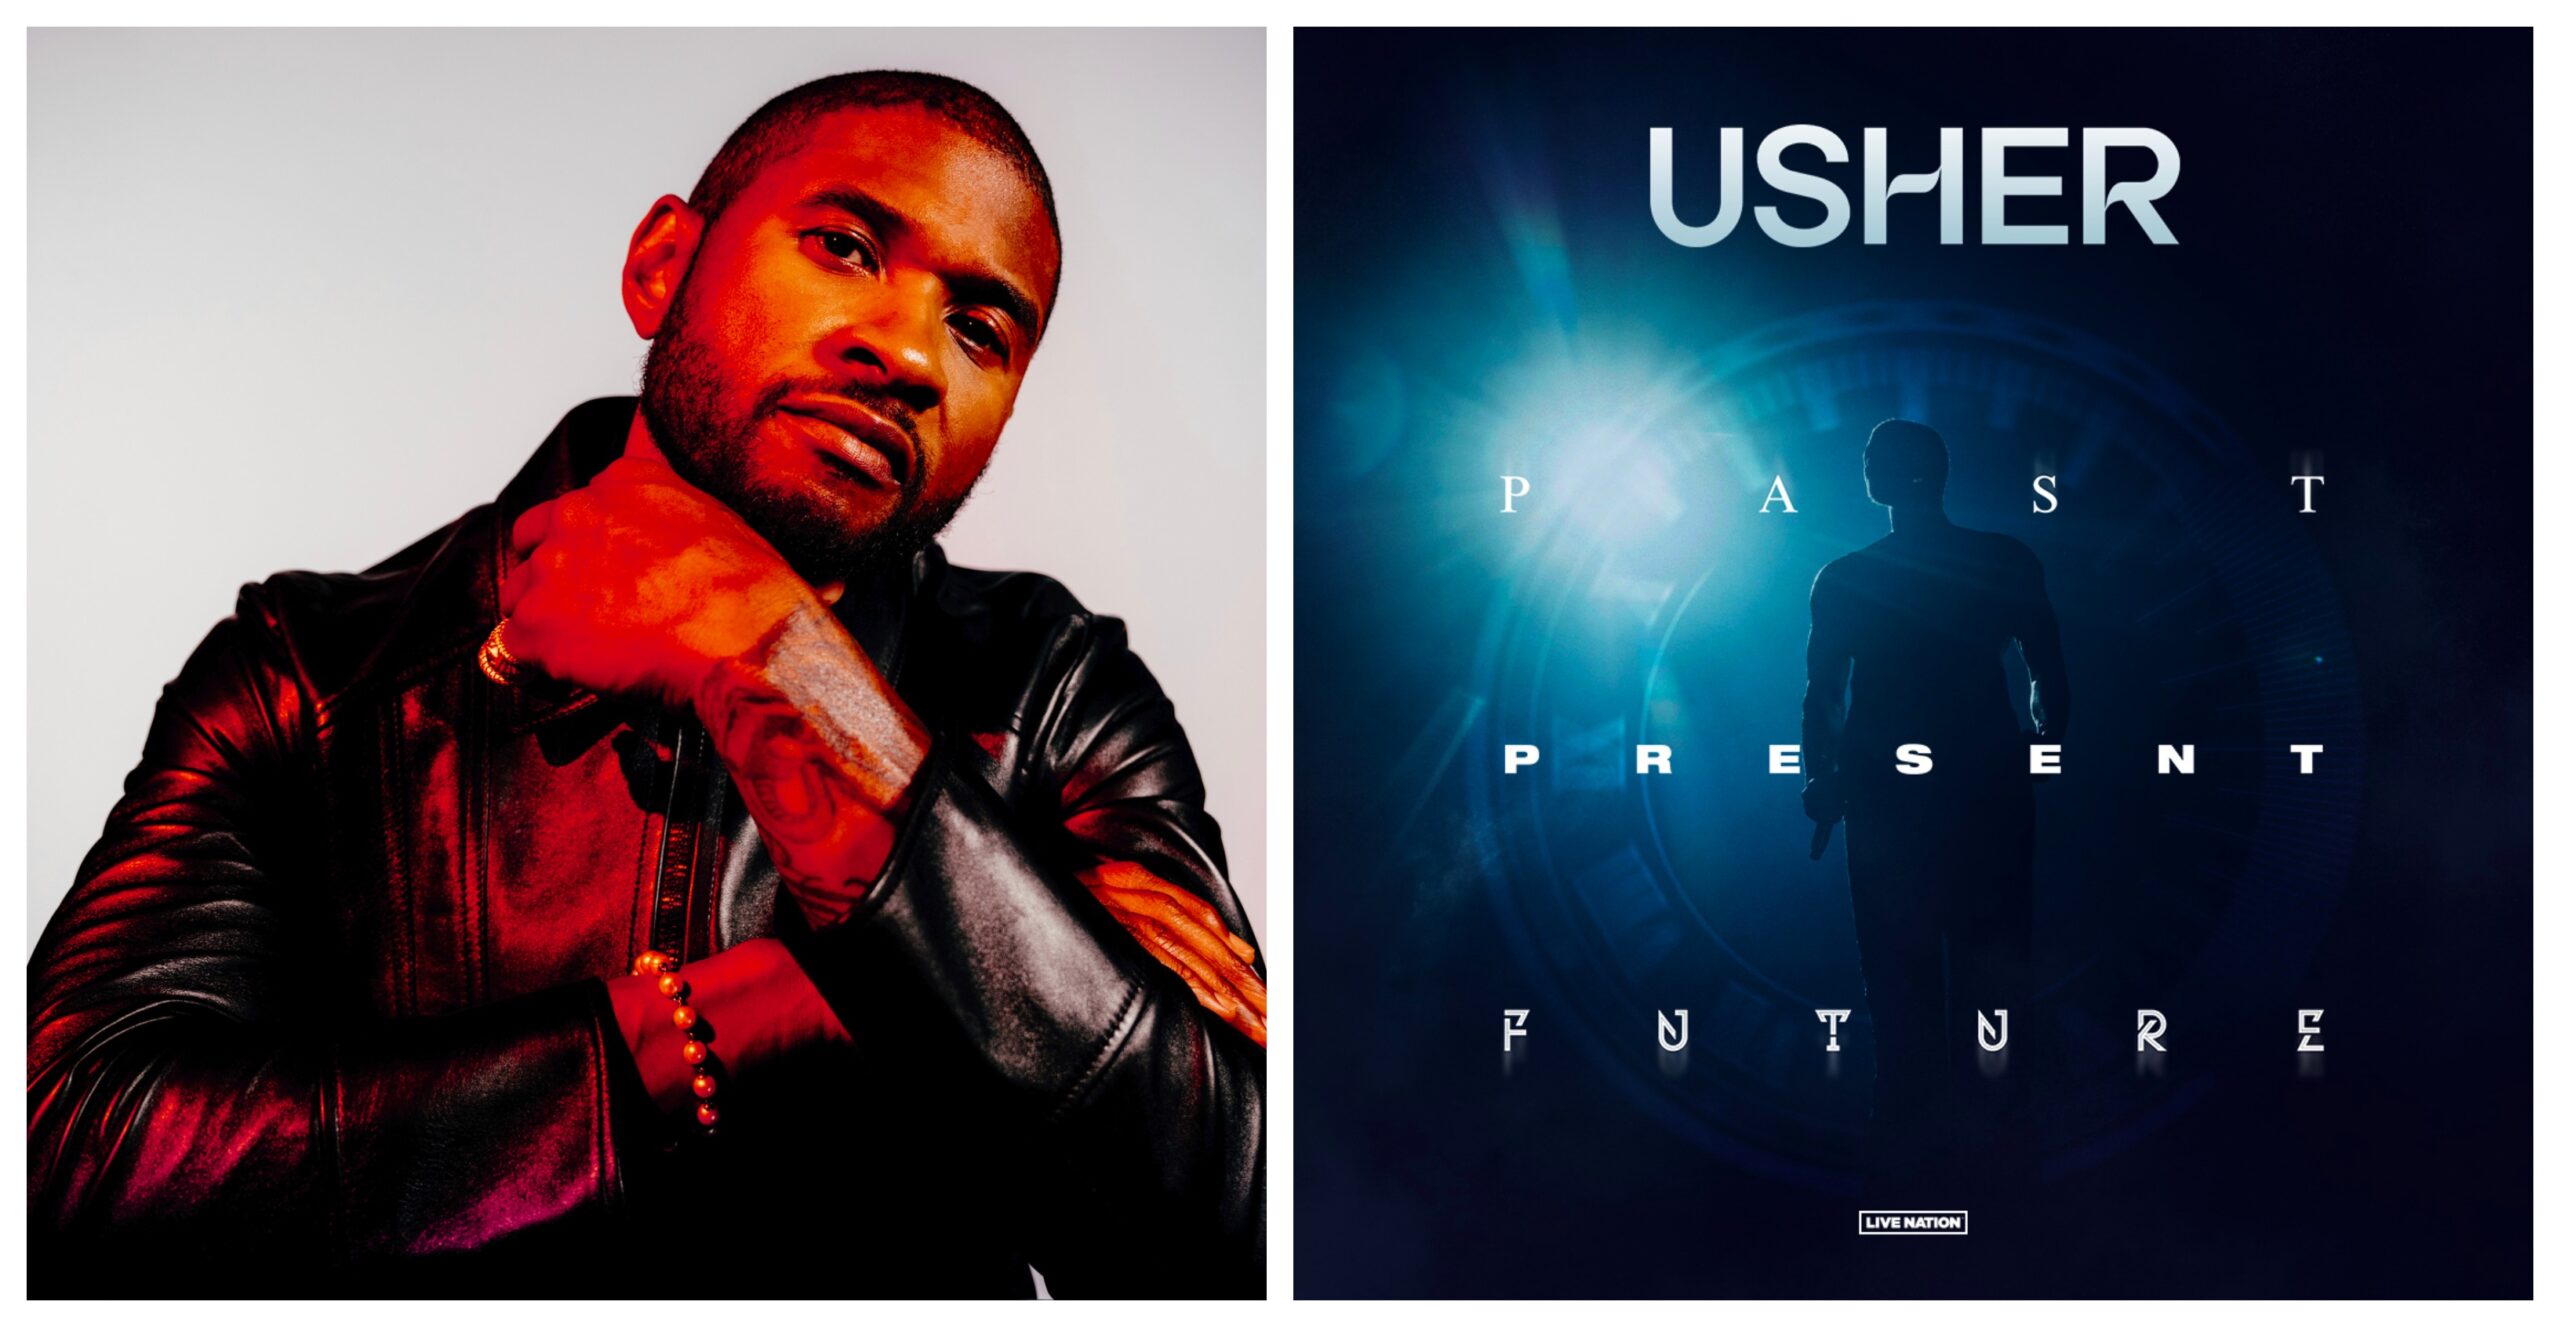 Huge Demand! Usher Adds Extra Dates to ‘Past Present Future’ Tour After EPIC Super Bowl Halftime Show Performance